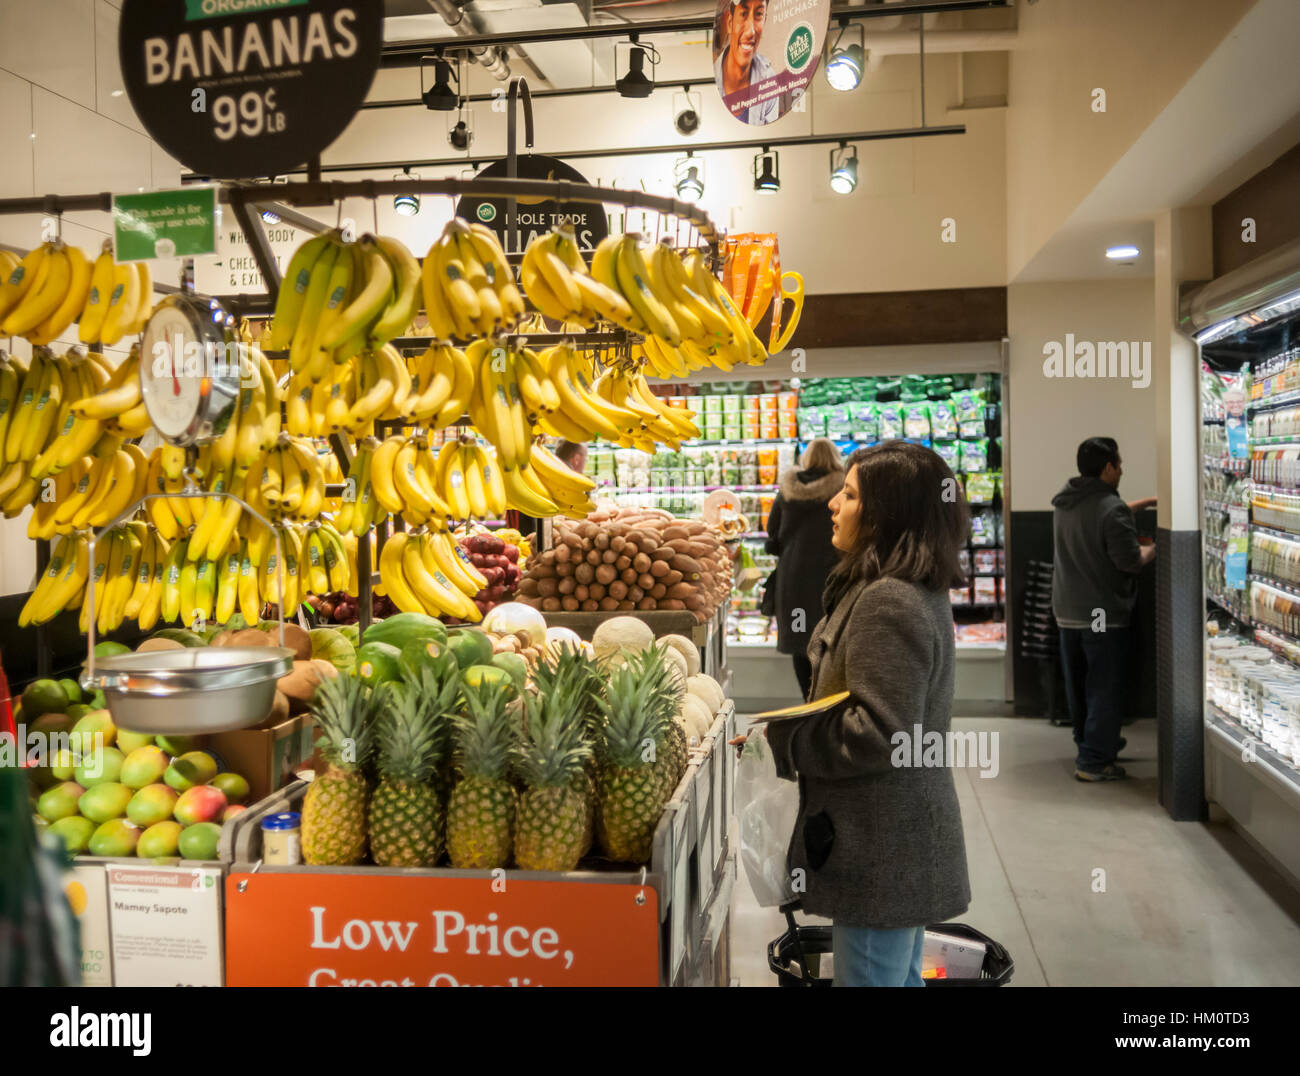 https://c8.alamy.com/comp/HM0TD3/banana-display-in-the-produce-department-in-the-new-whole-foods-market-HM0TD3.jpg